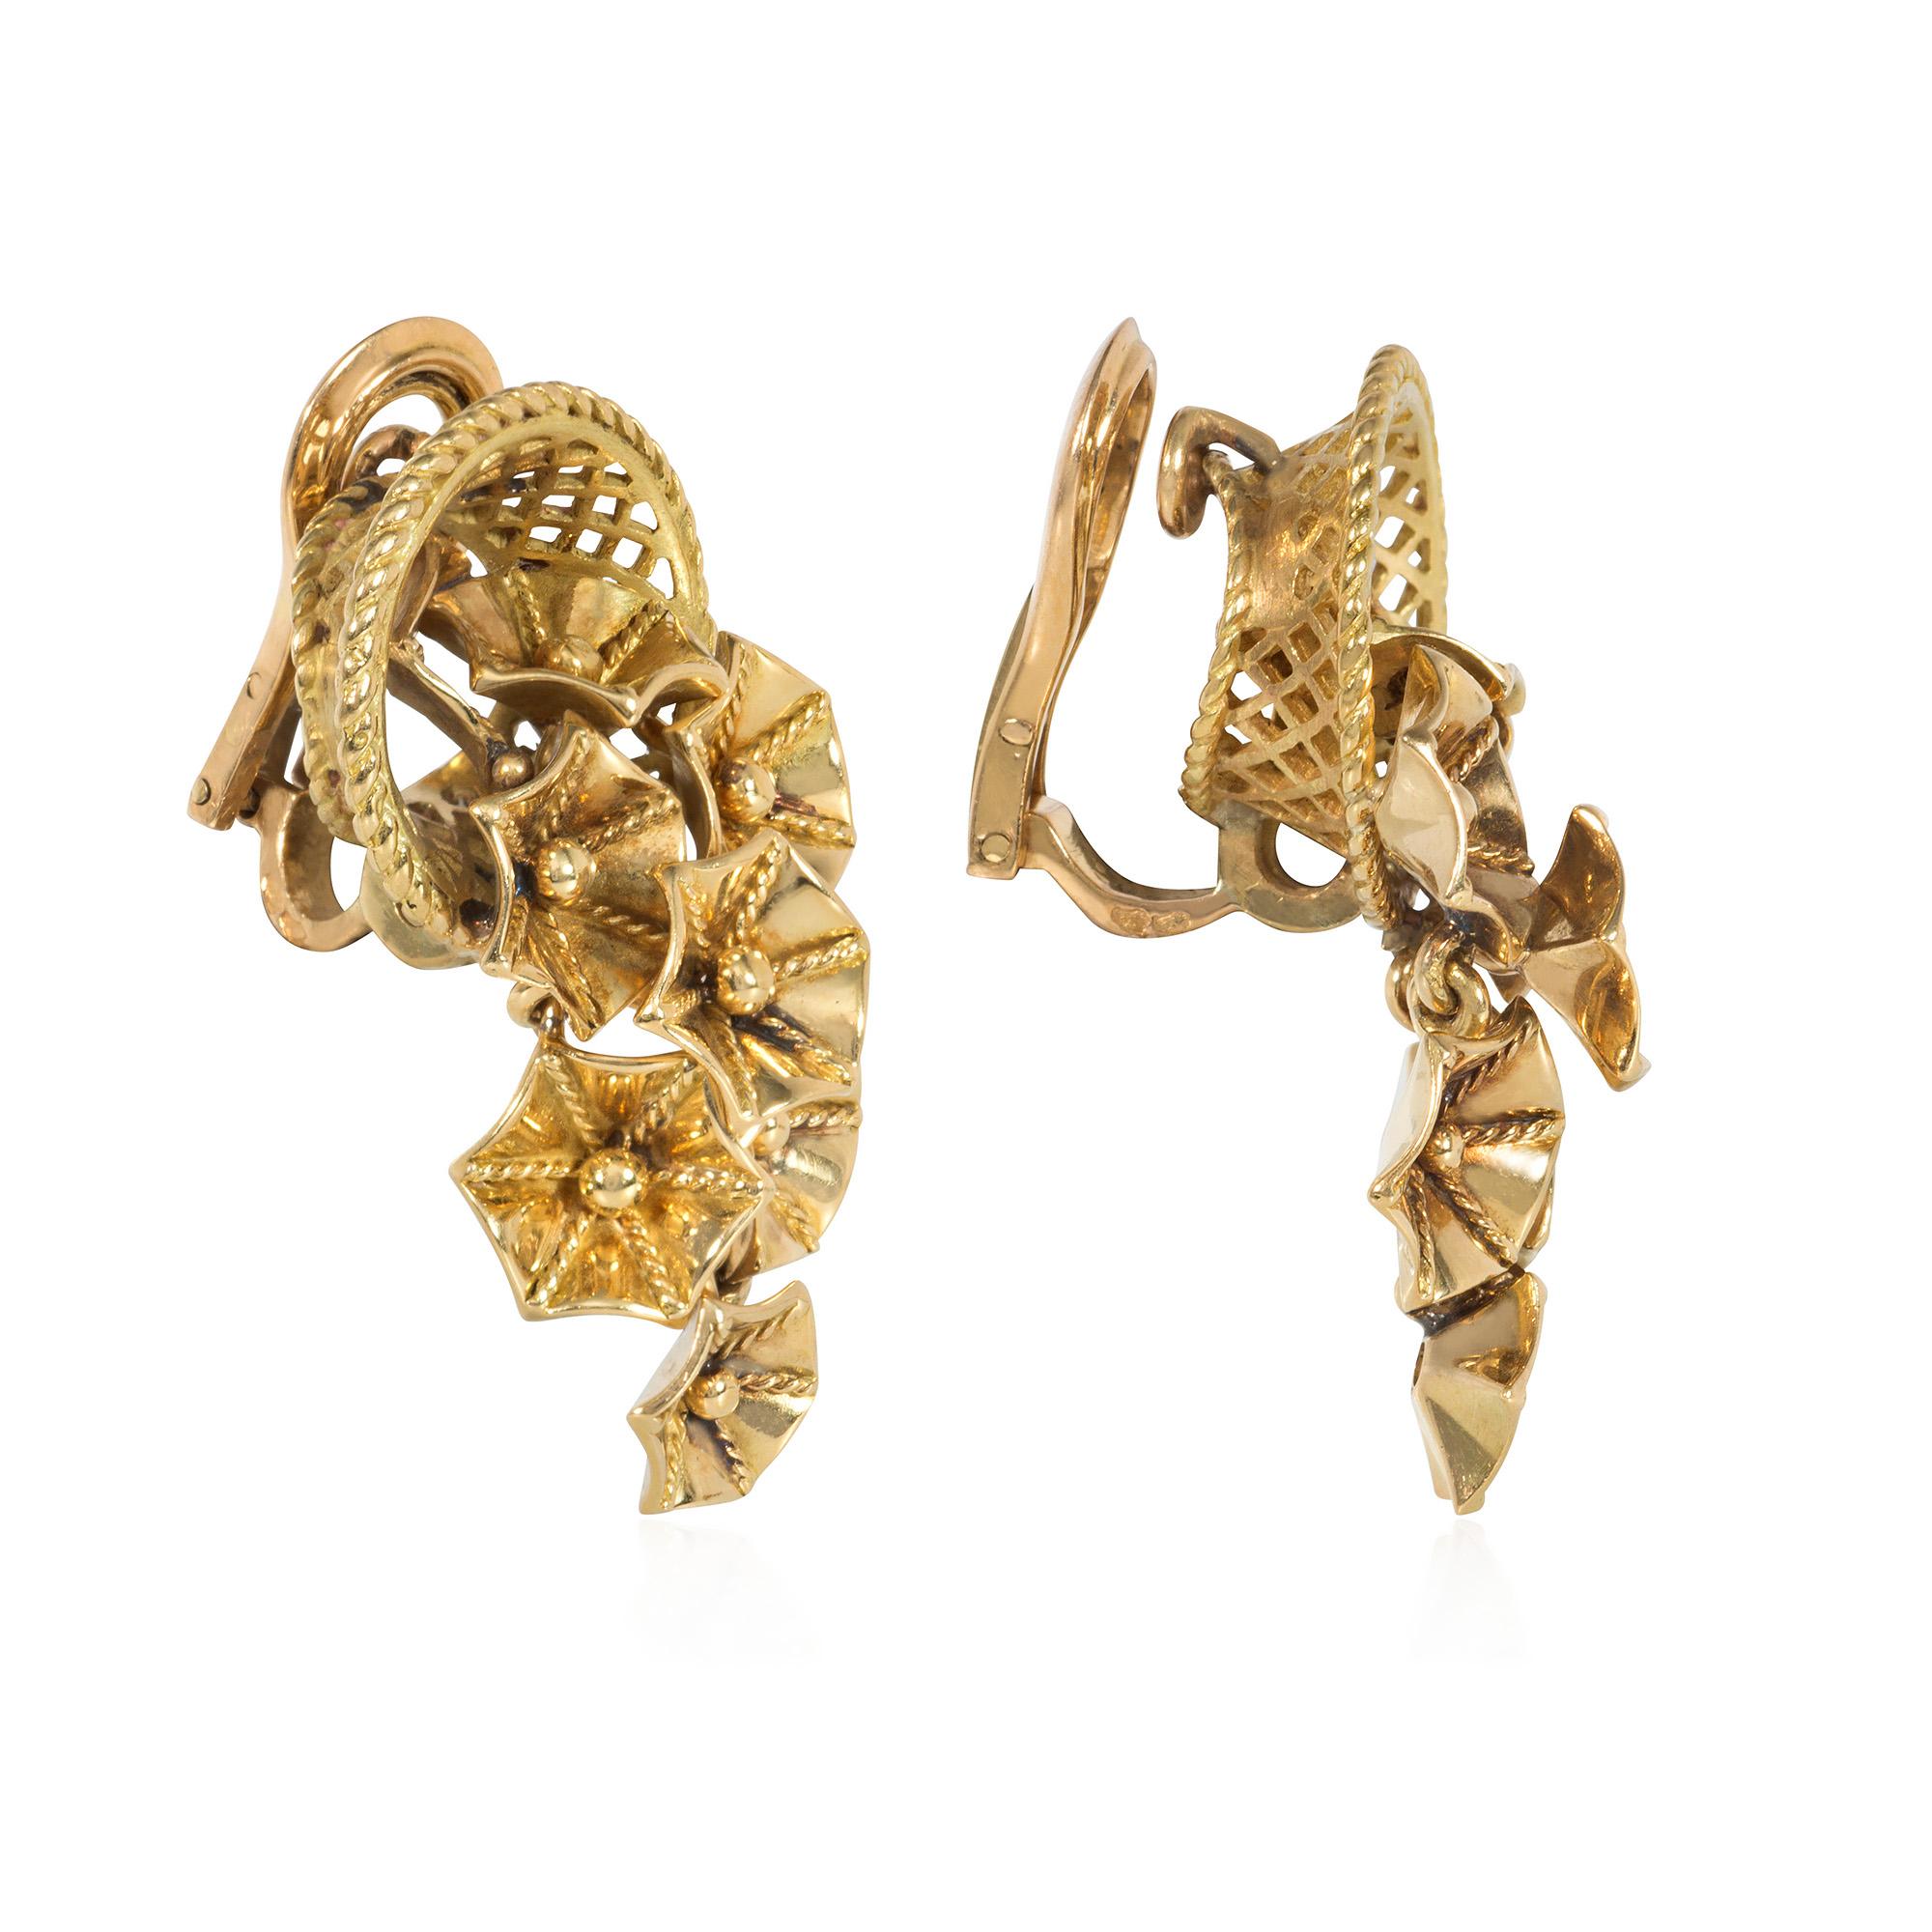 A pair of Retro gold earrings designed as woven baskets with bouquets of tumbling articulated flowers, in 18k with clip backs.  France